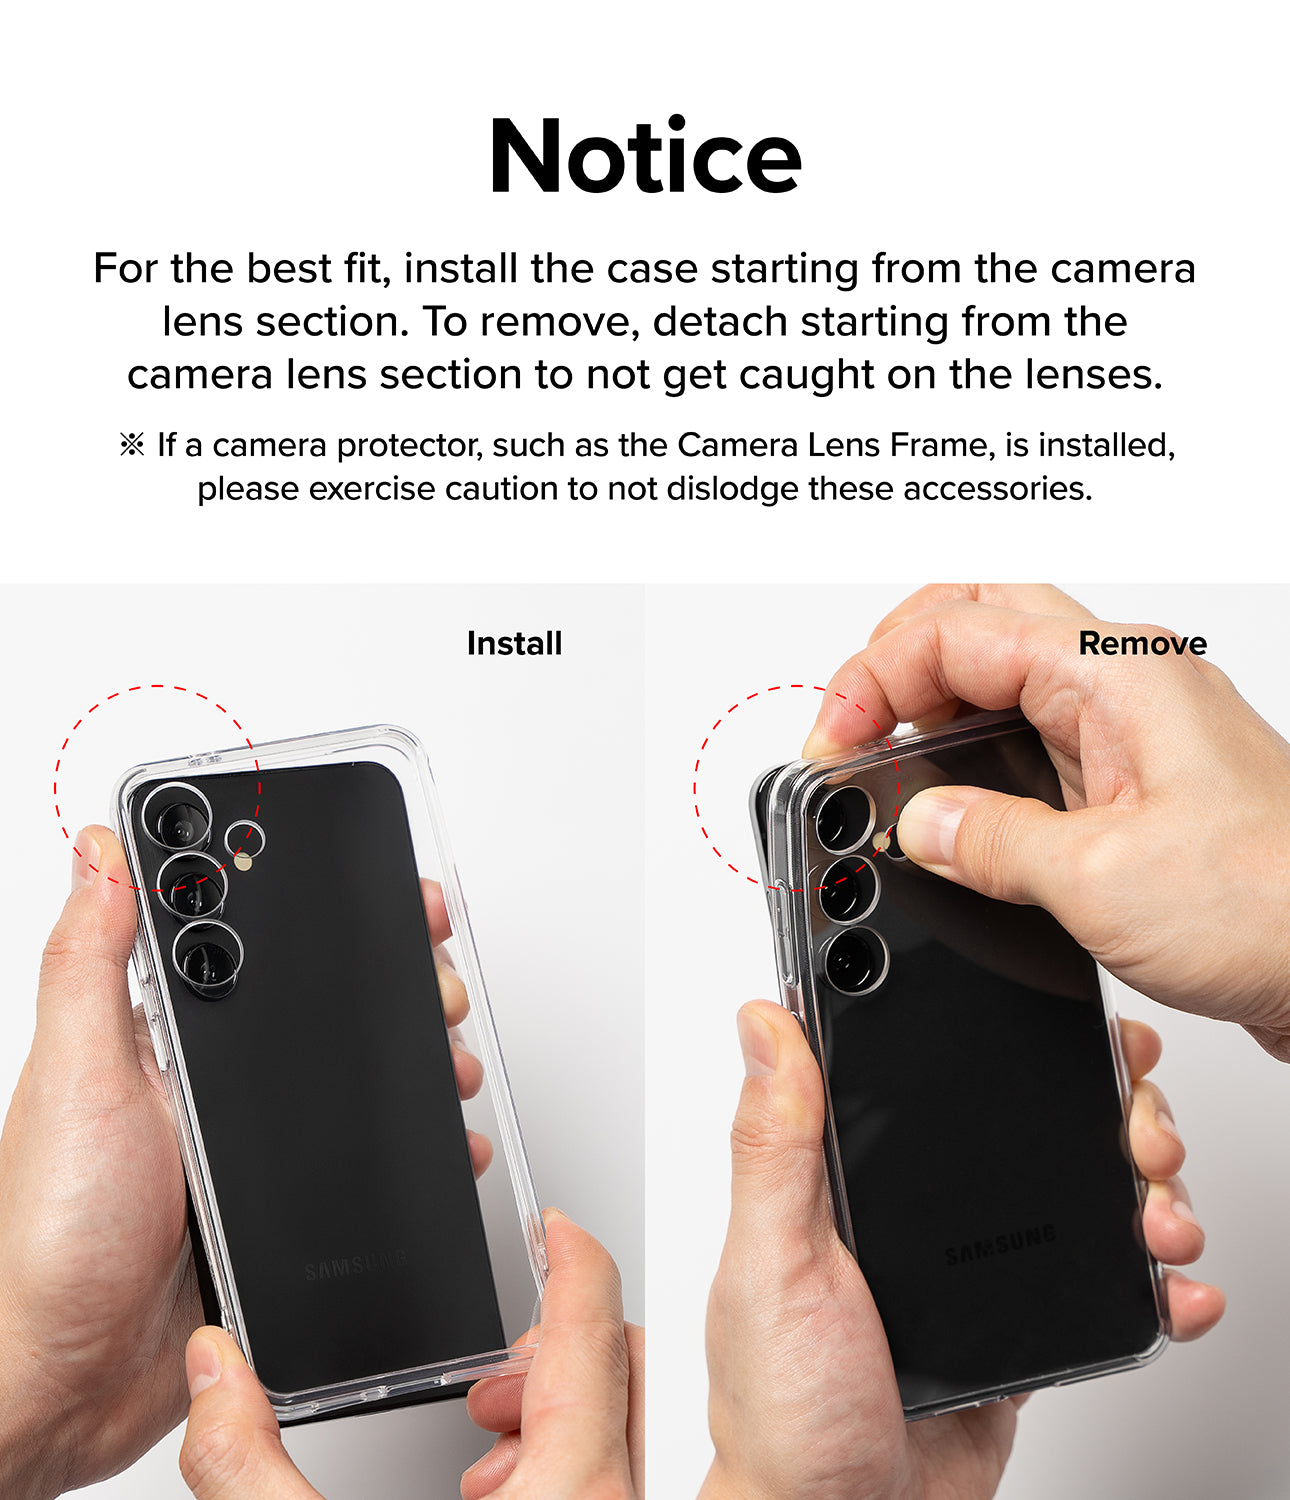 Galaxy S24 Plus Case | Fusion Card - Notice. For the best fit, install the case starting from the camera lens section. To remove, detach starting from the camera lens section to not get caught on the lenses.